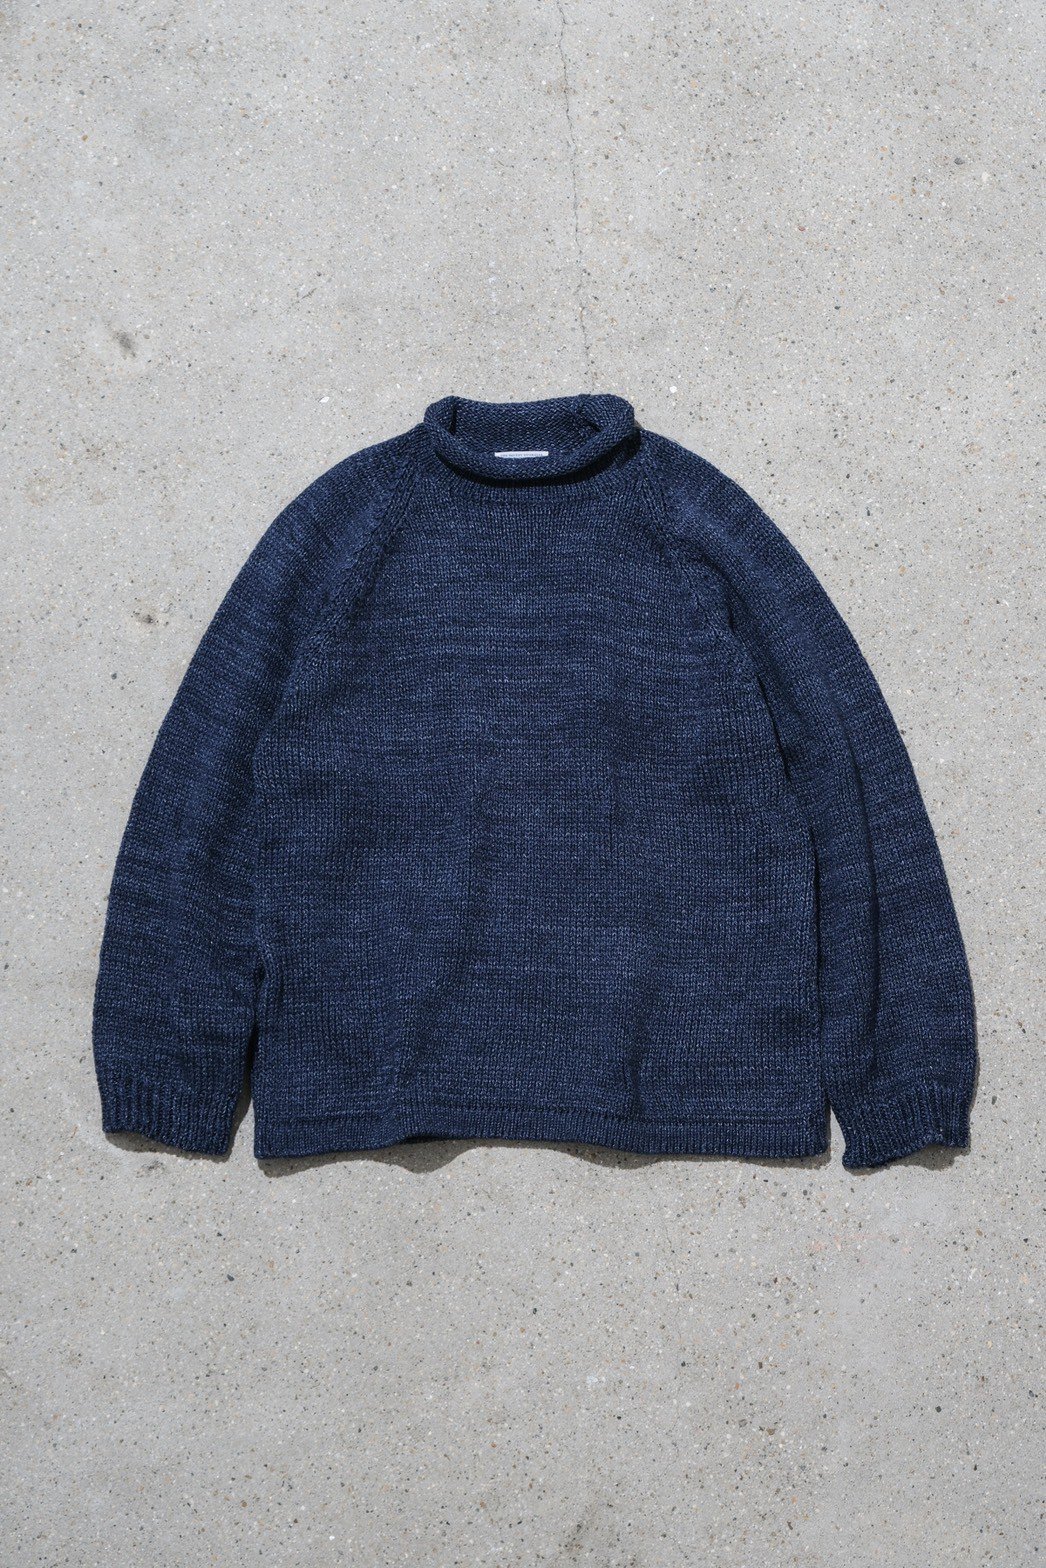 THE UNION / ROLL'N KNIT